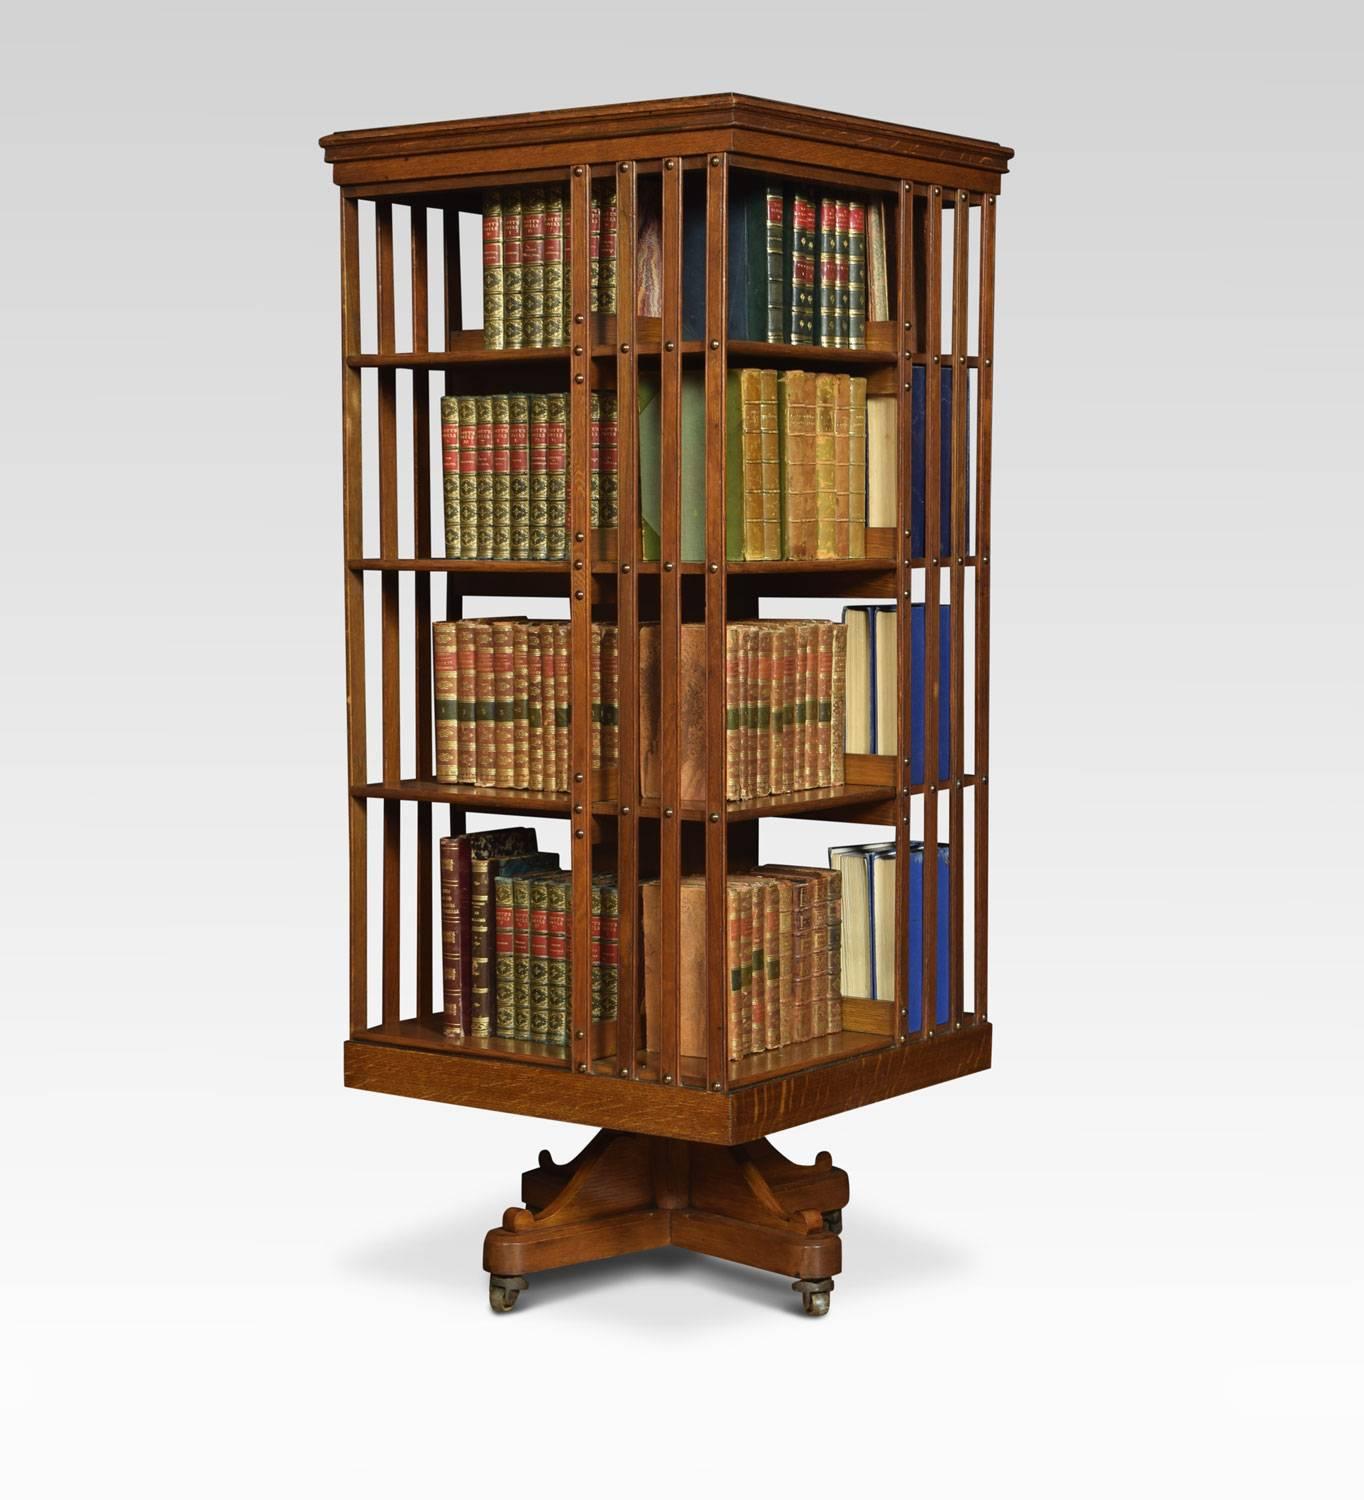 Oak revolving bookcase the square top above four tiers with a arrangement off shelves raised up on cruciform base with castors.
Dimensions:
Height 49 inches
Width 21 inches
Depth 21 inches.